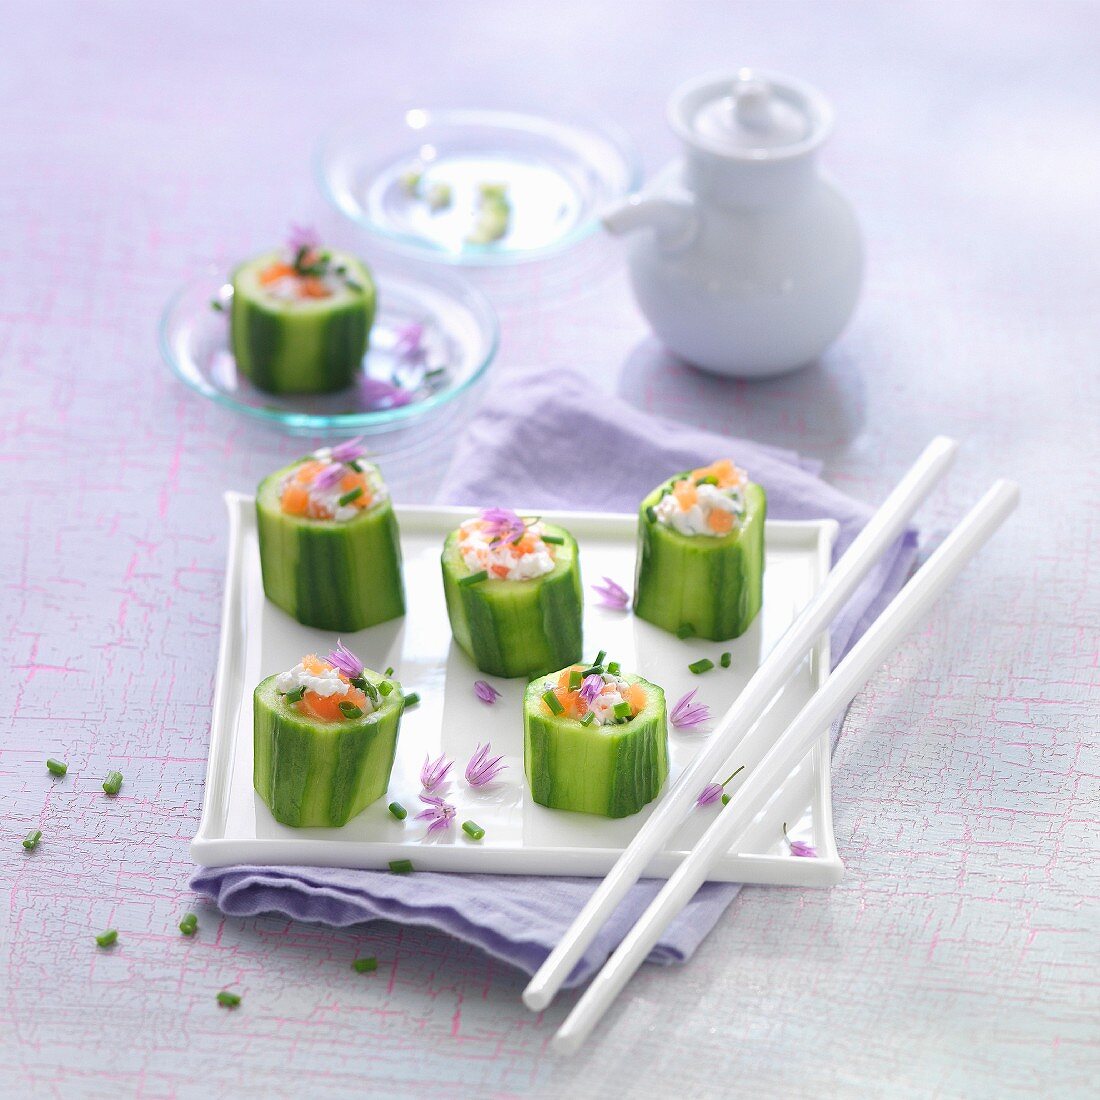 Cucumber sections stuffed with smoked salmon and cream cheese